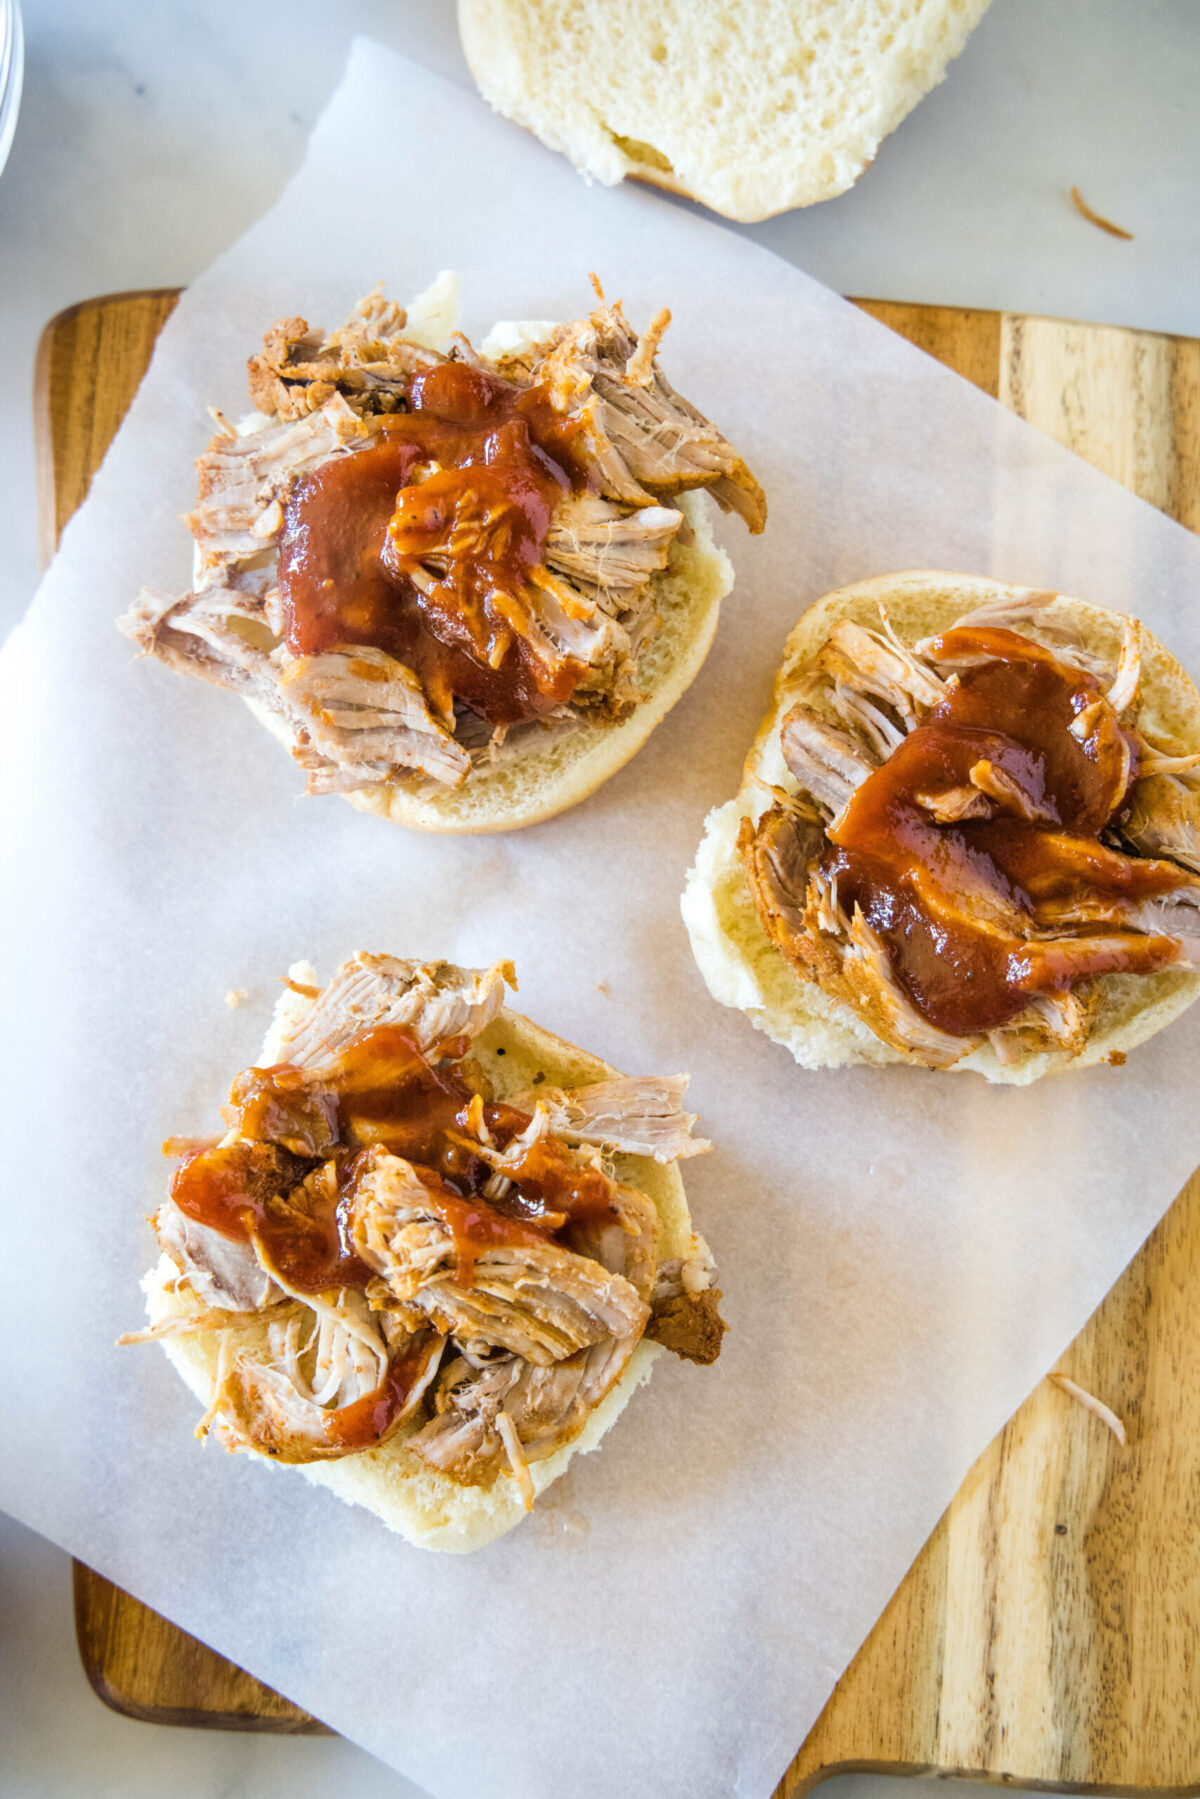 Overhead view of three bottom slider buns topped with pulled pork and barbecue sauce.